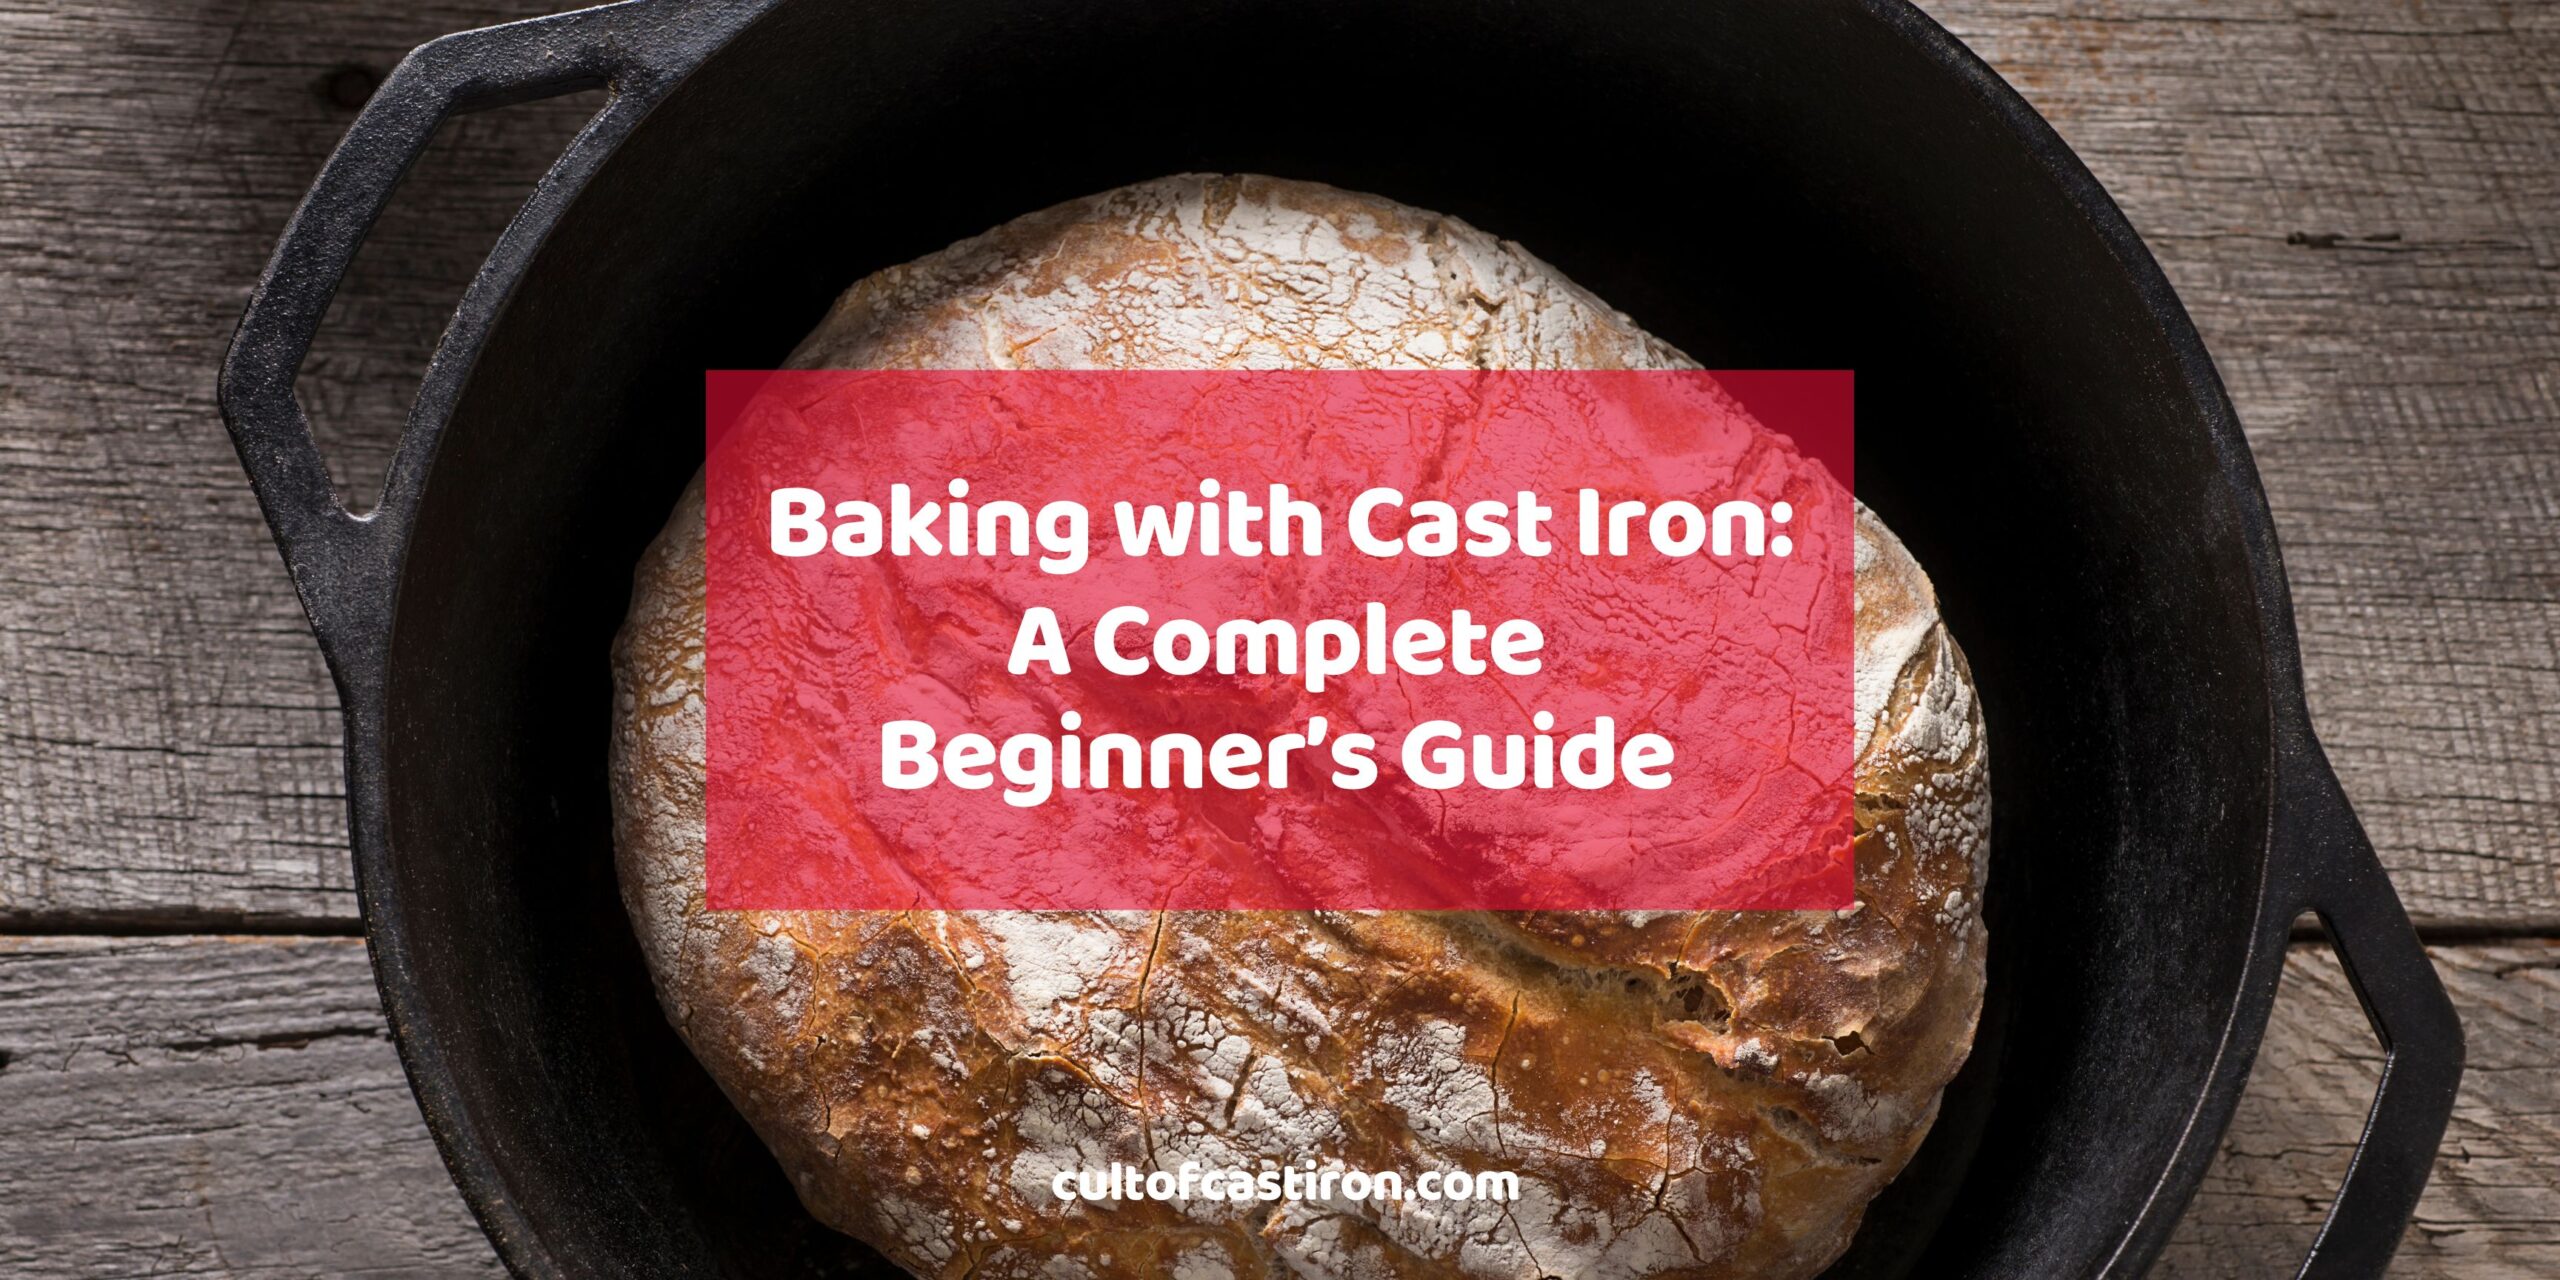 https://cultofcastiron.com/wp-content/uploads/2023/09/baking-with-cast-iron-a-complete-beginners-guide-banner-scaled.jpg